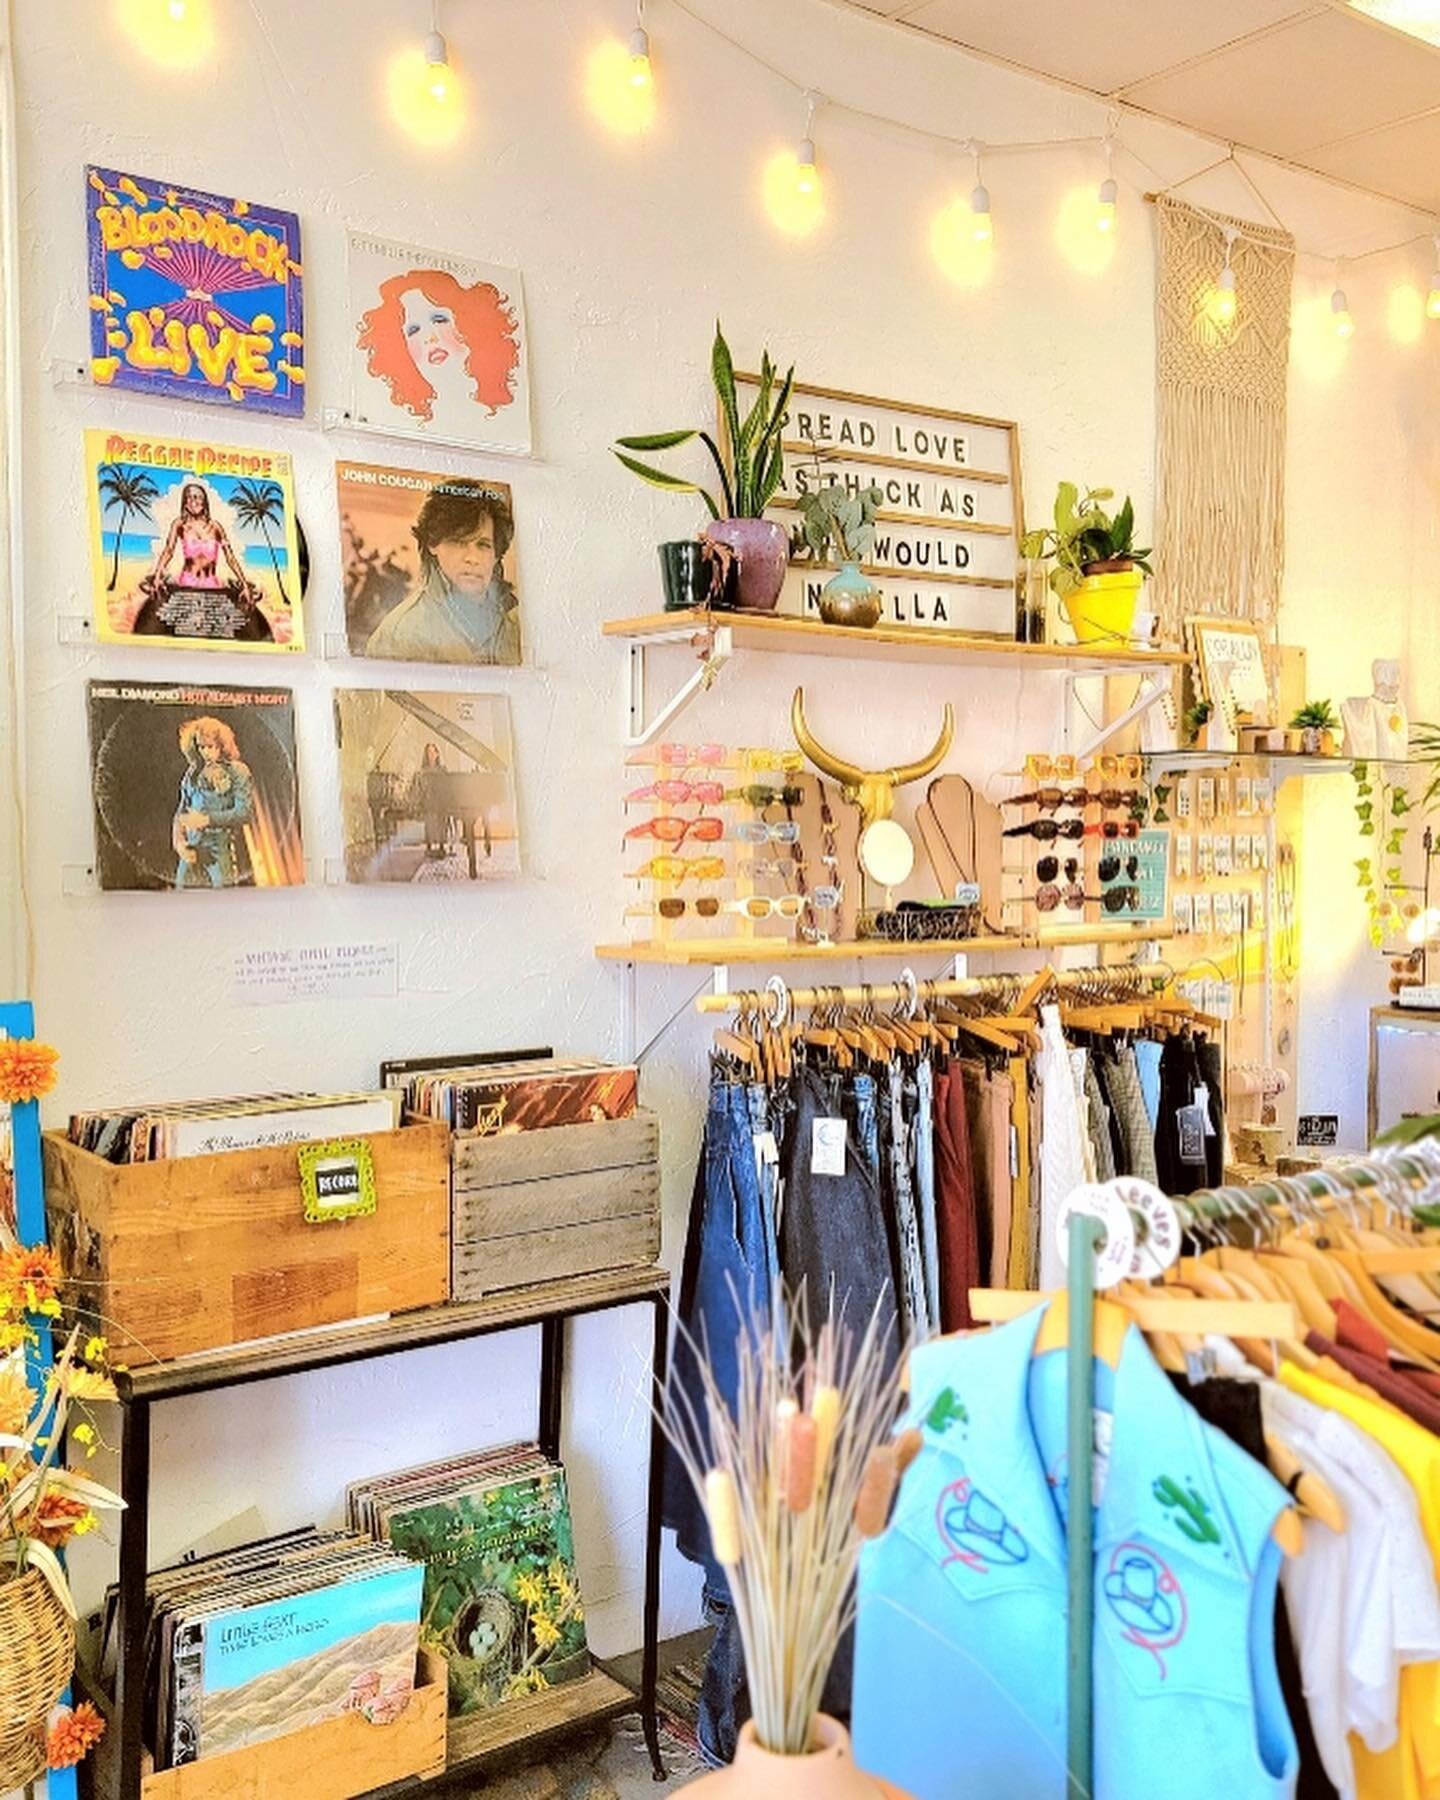 It&rsquo;s a great spring day! Full of sunshine, groovy tunes and a nice warm weather. Door is open come on by the shop. It is filled with the raddest spring looks, curated by the coralun collective of bad ass vendors. 

Shop open 11-4pm
Hope to see 